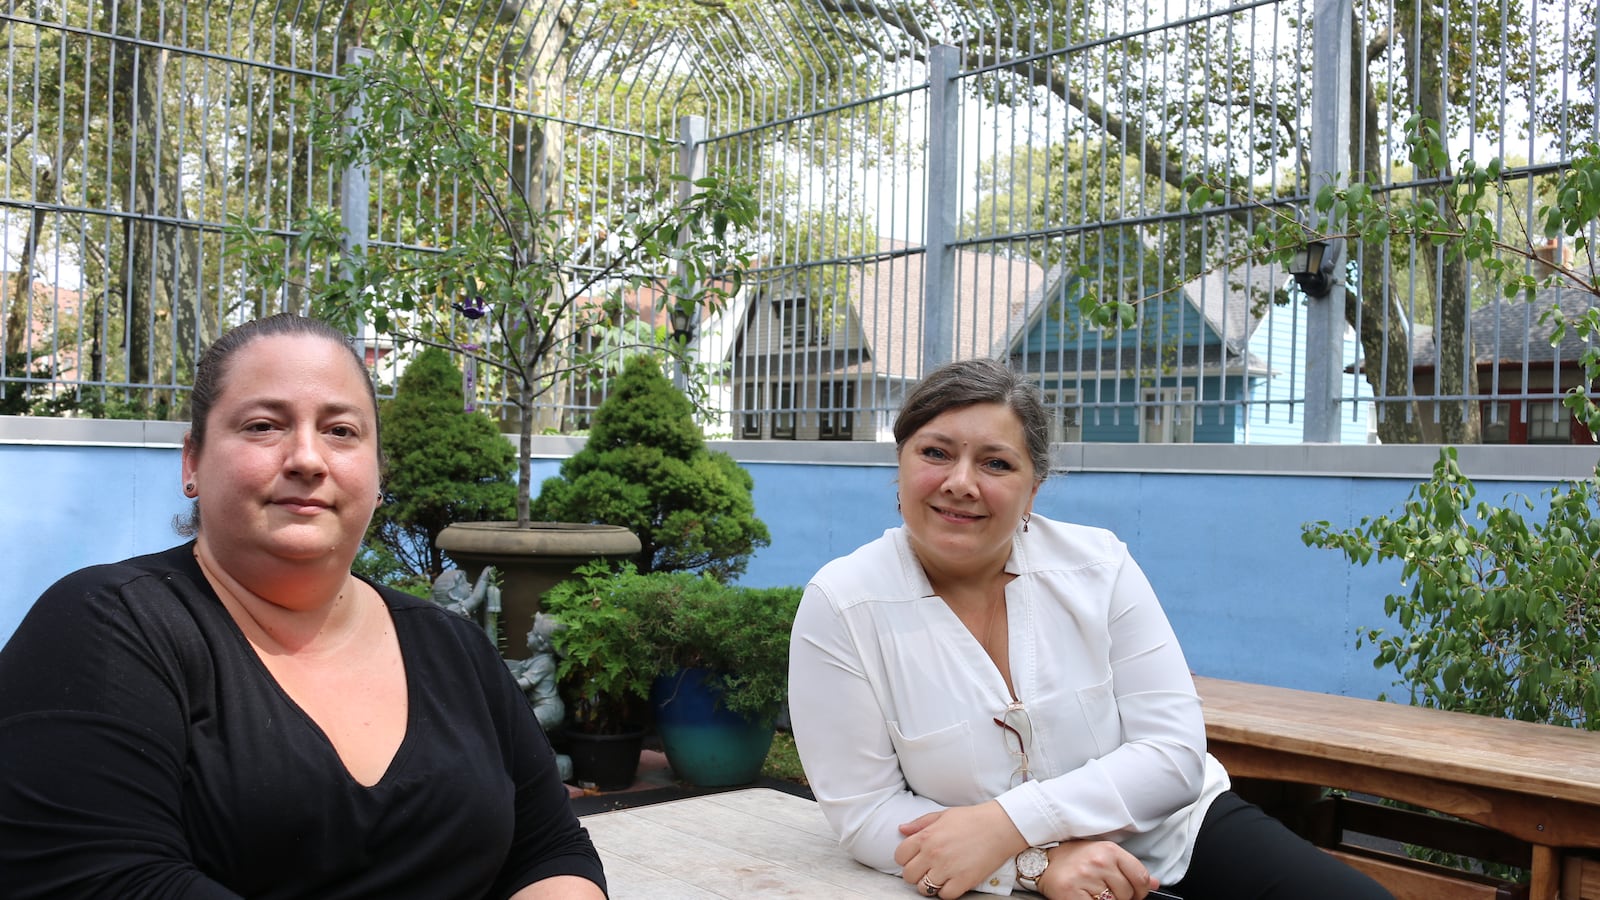 Pre-K teacher Jennifer Corre, left, and Oksana Grebenyuk, right, the education director of Kaleidoscope pre-K in Ditmas Park, decided to become unionized just before a deal was announced to substantially raise teacher pay.